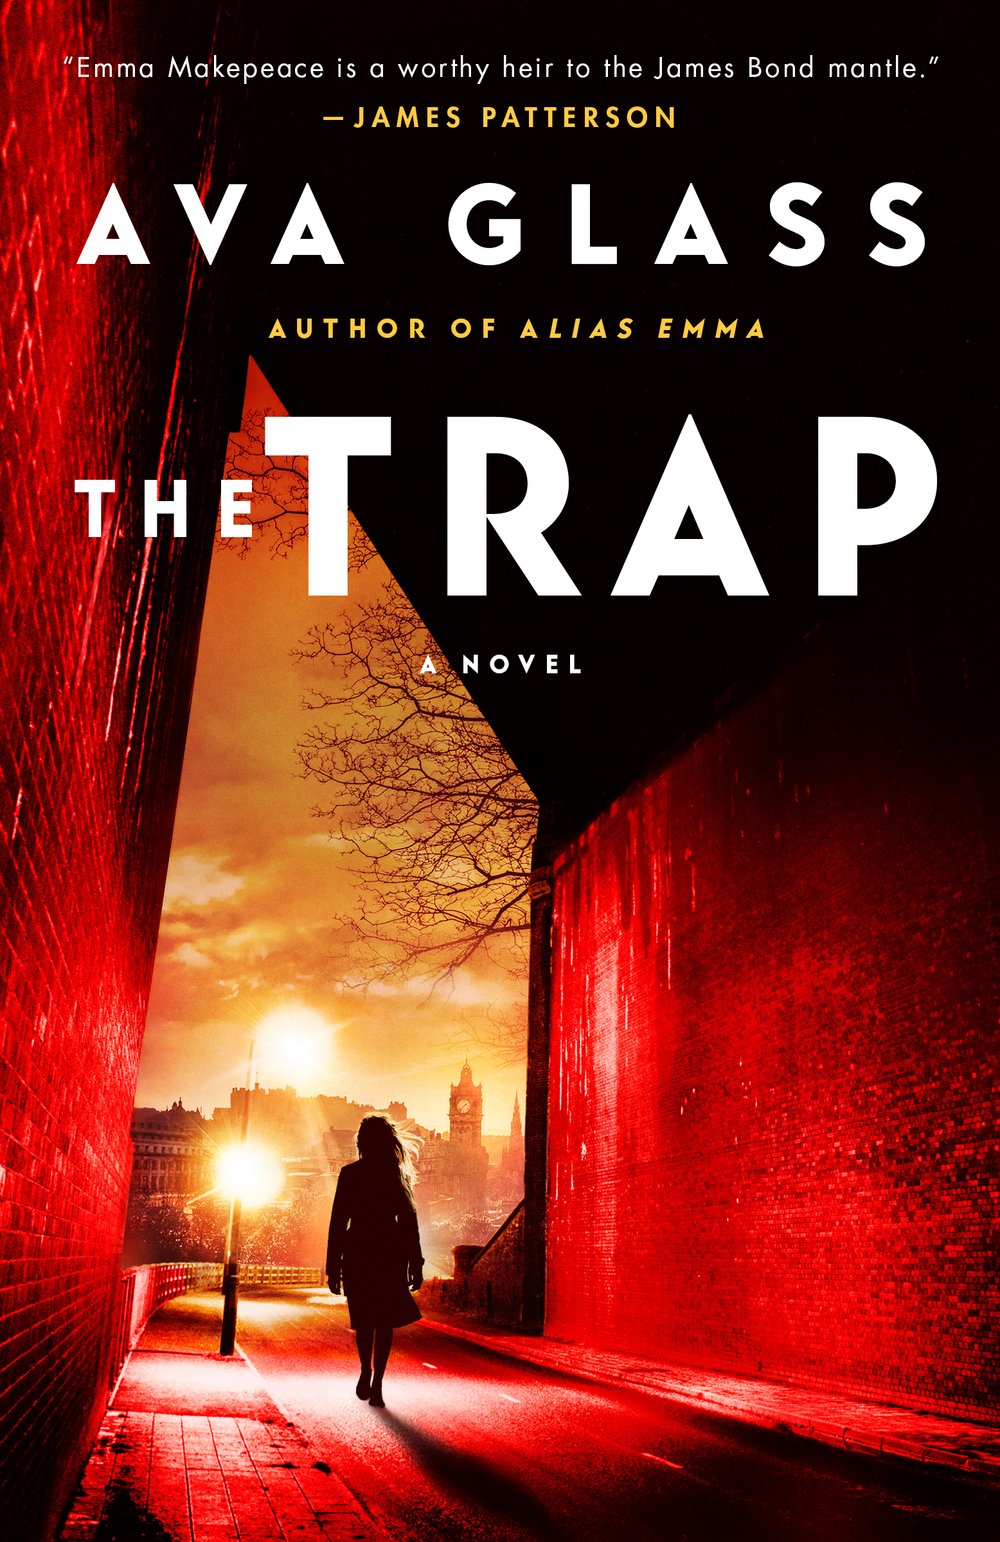 The Trap US cover final.jpg